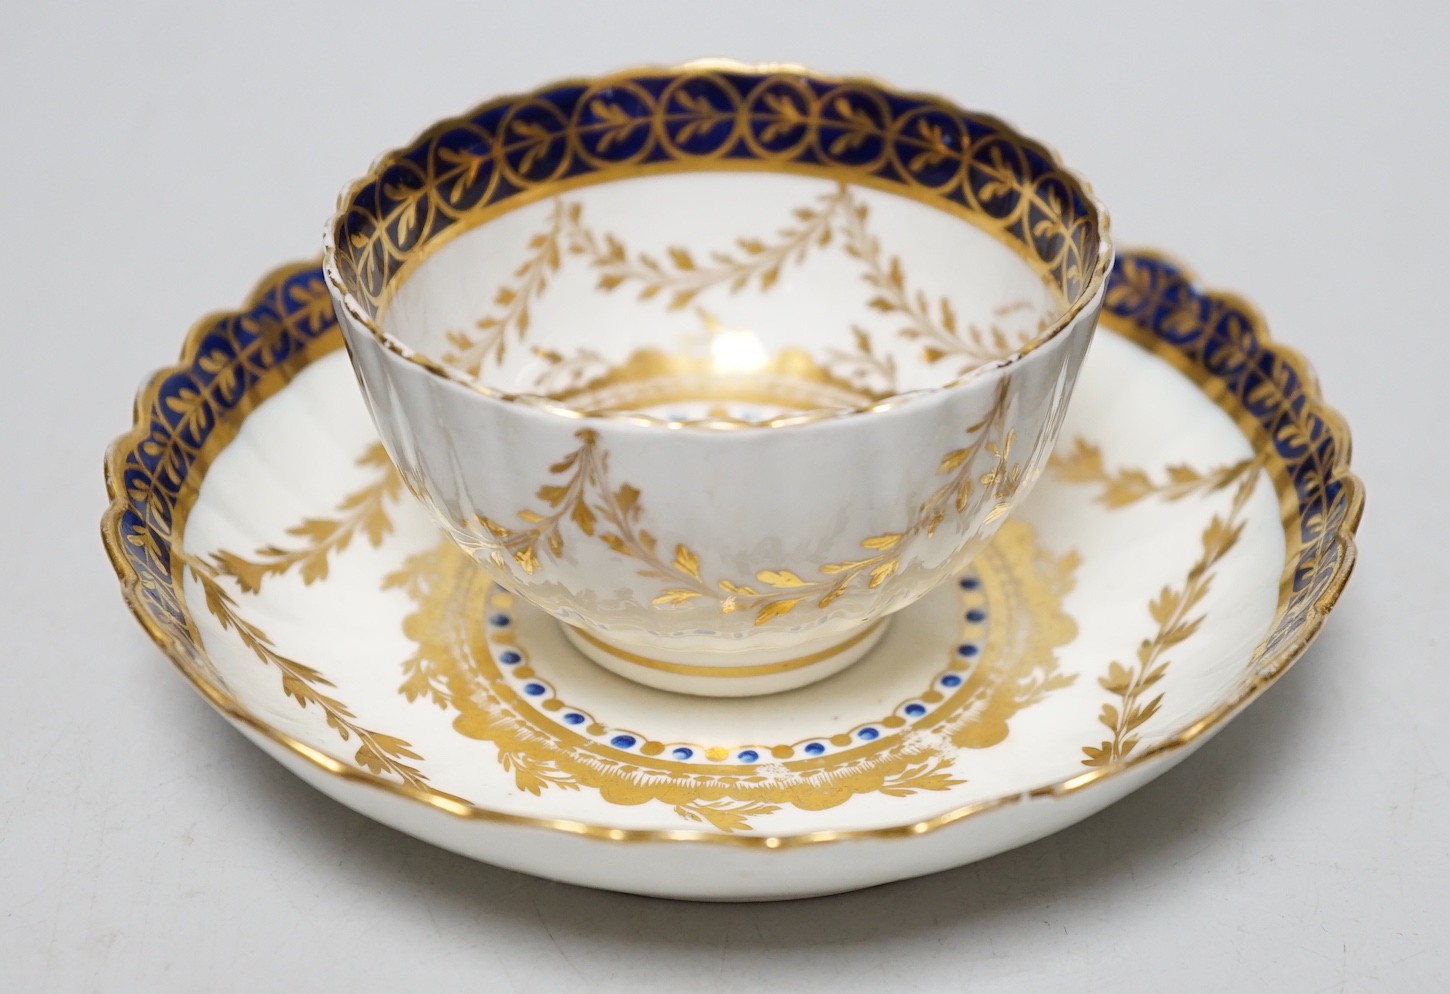 An 18th century Caughley rare teabowl and saucer painted with a crest of an arm clutching a dragon en-circled by three gilt borders. 6cm tall overall                                                                       